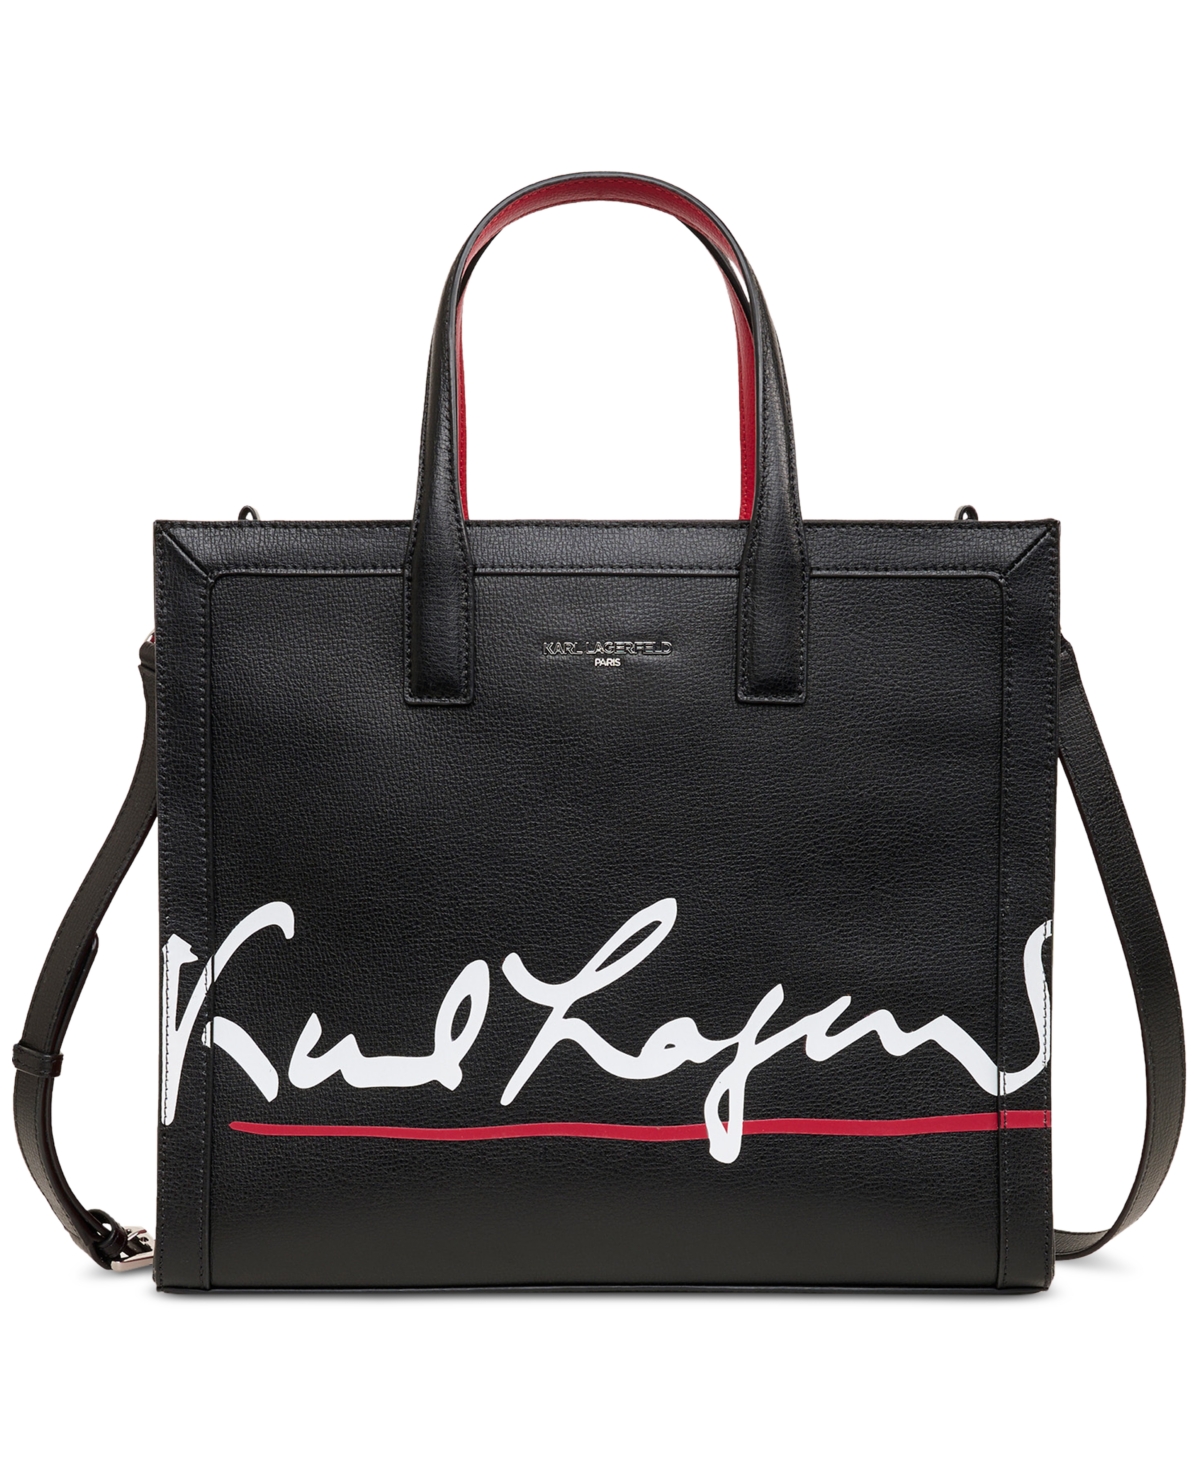 Karl Lagerfeld Nouveau Karl Leather Medium Tote In Black/white/red ...